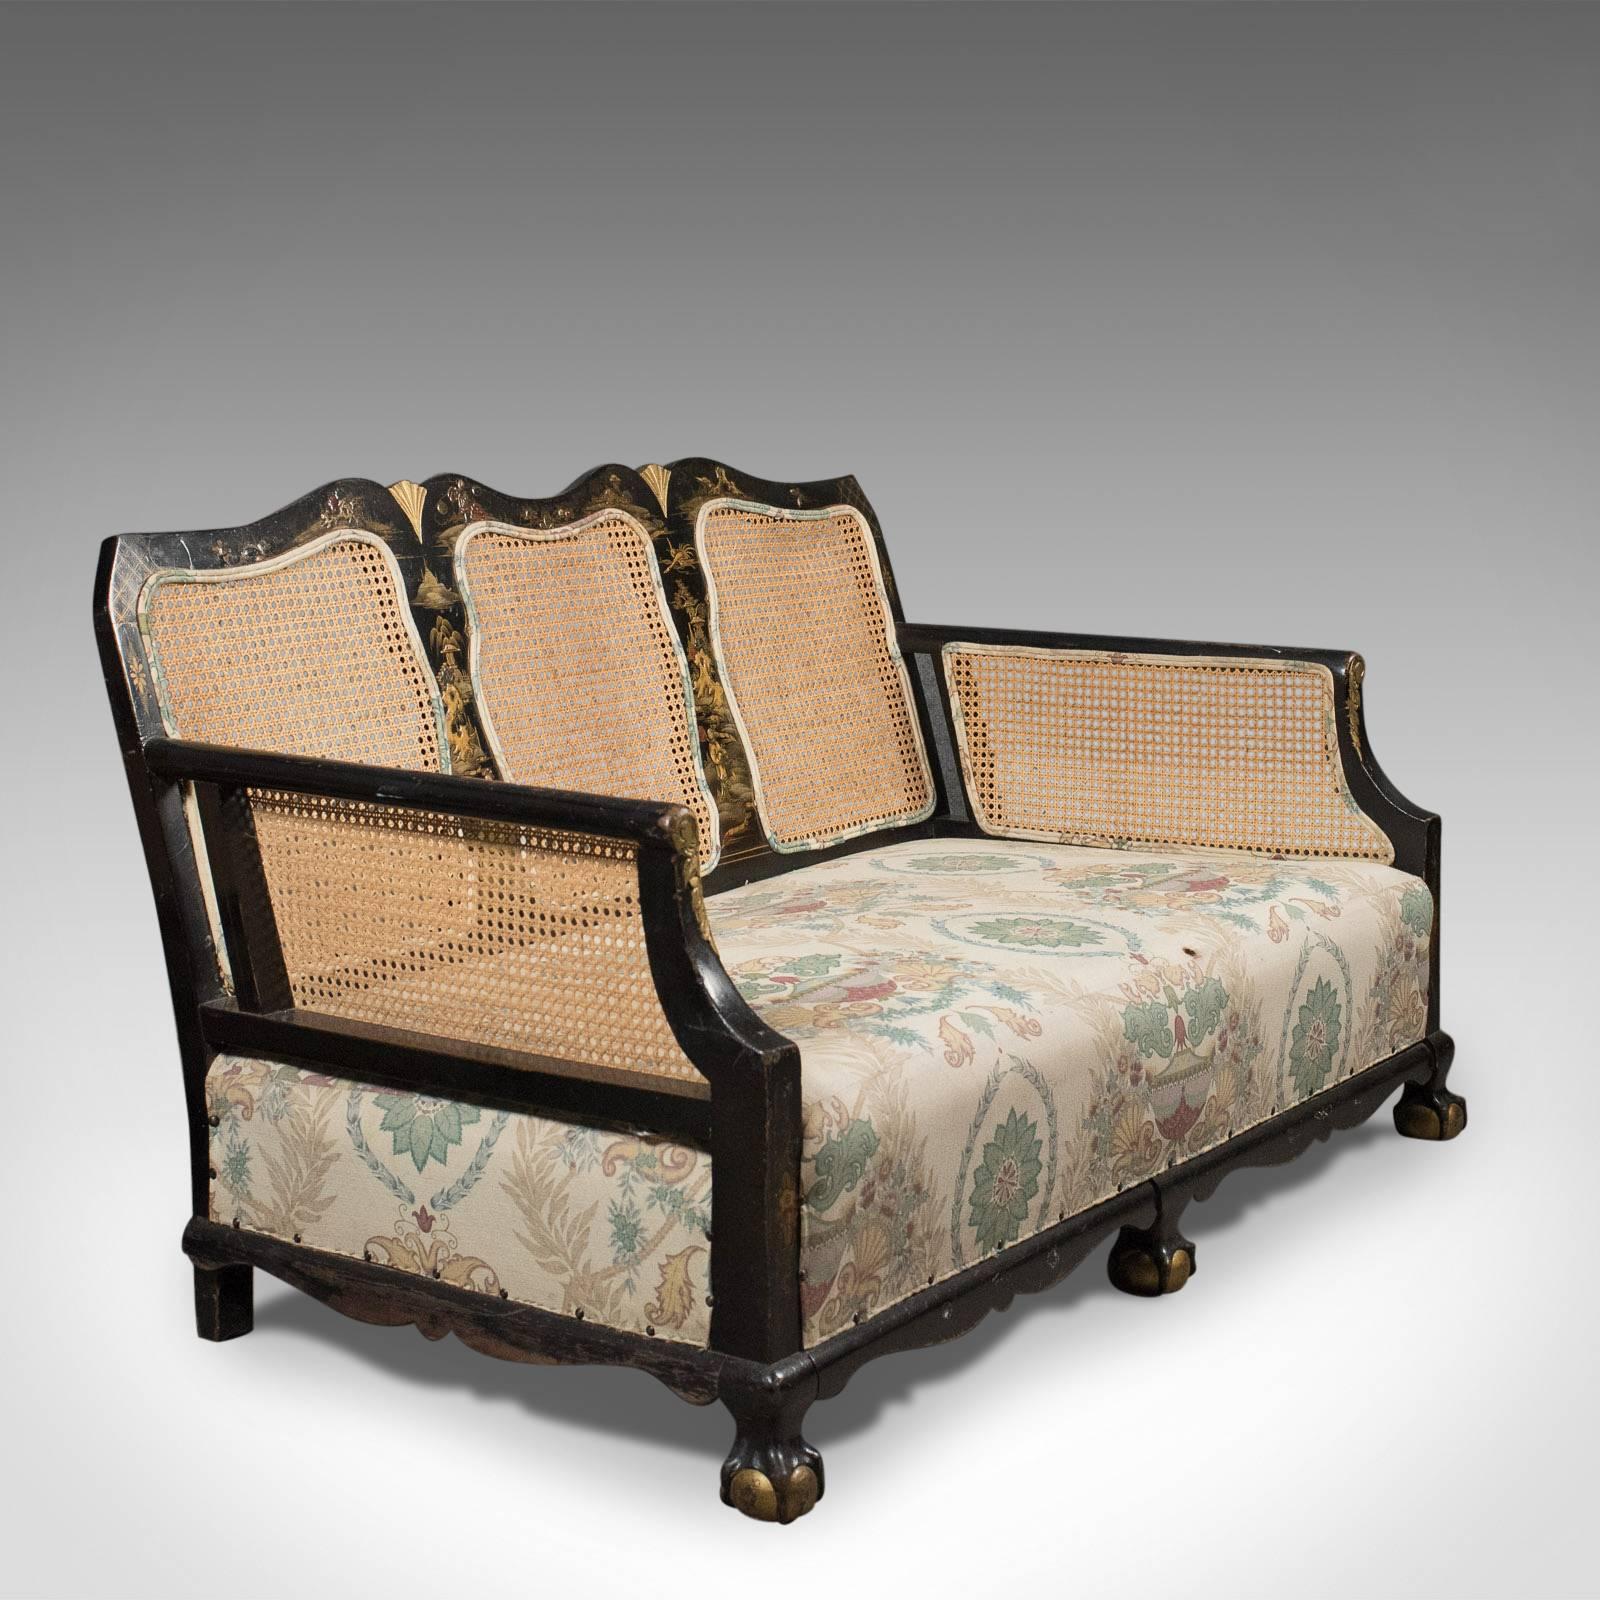 English Aesthetic Movement Antique Conservatory Suite, Chinoiserie Bergere, circa 1890